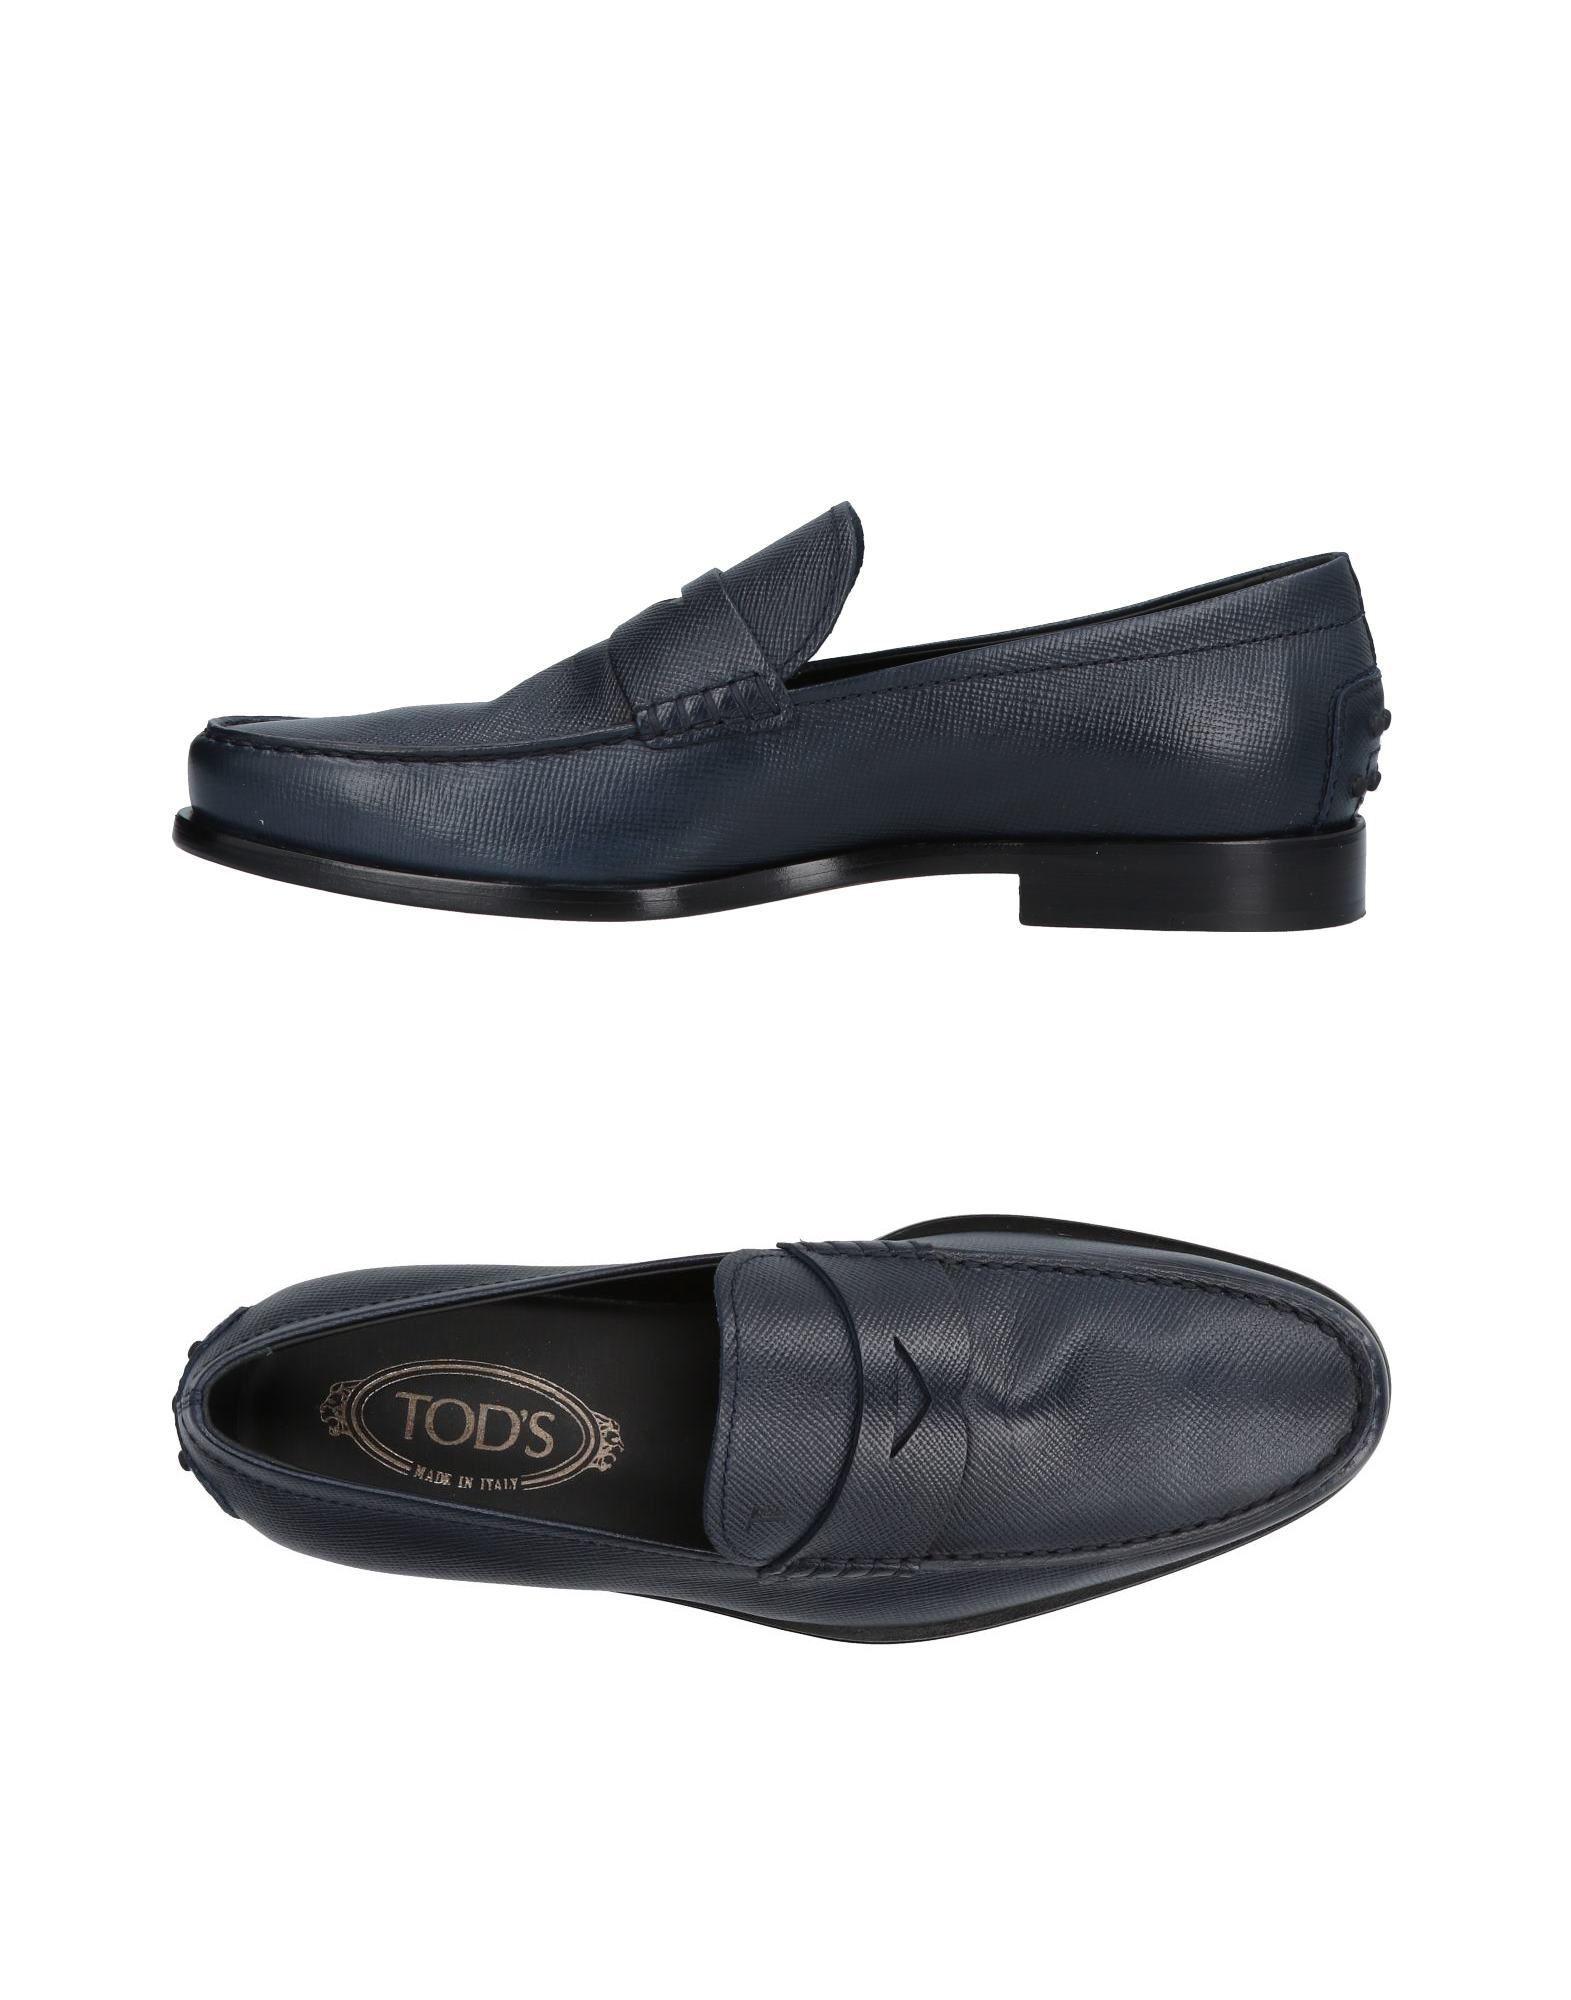 Tod's Leather Loafers in Dark Blue (Blue) for Men - Lyst